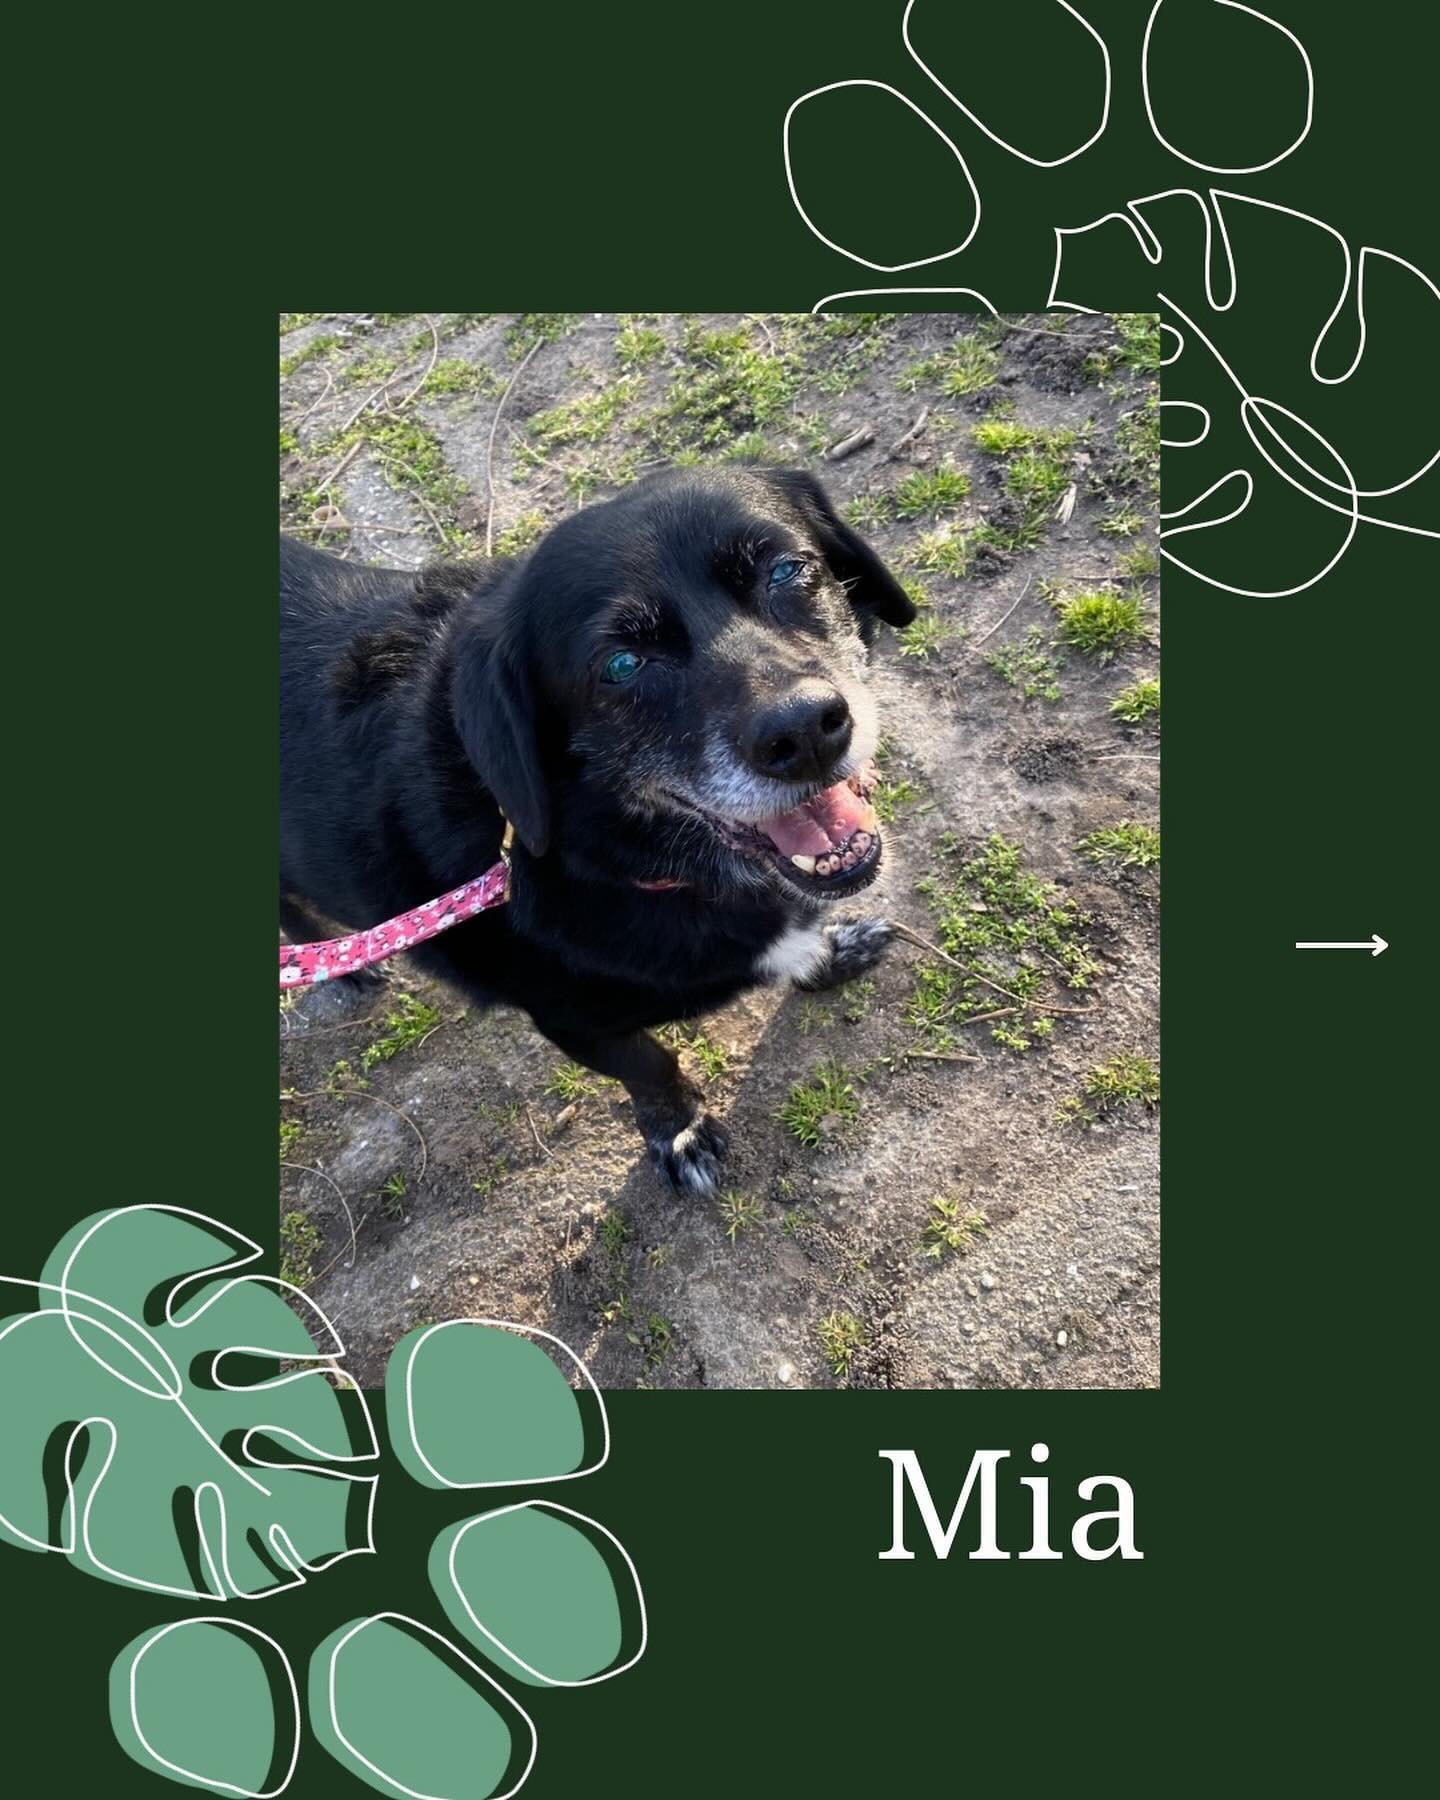 Mia made it to 16 years old. 🐾

She was stressed in vet offices, so her guardians knew that they didn&rsquo;t want her to have that stress anymore. 🥹

At 16, Mia needed a lot of different support, from acupuncture, to help with other issues that an